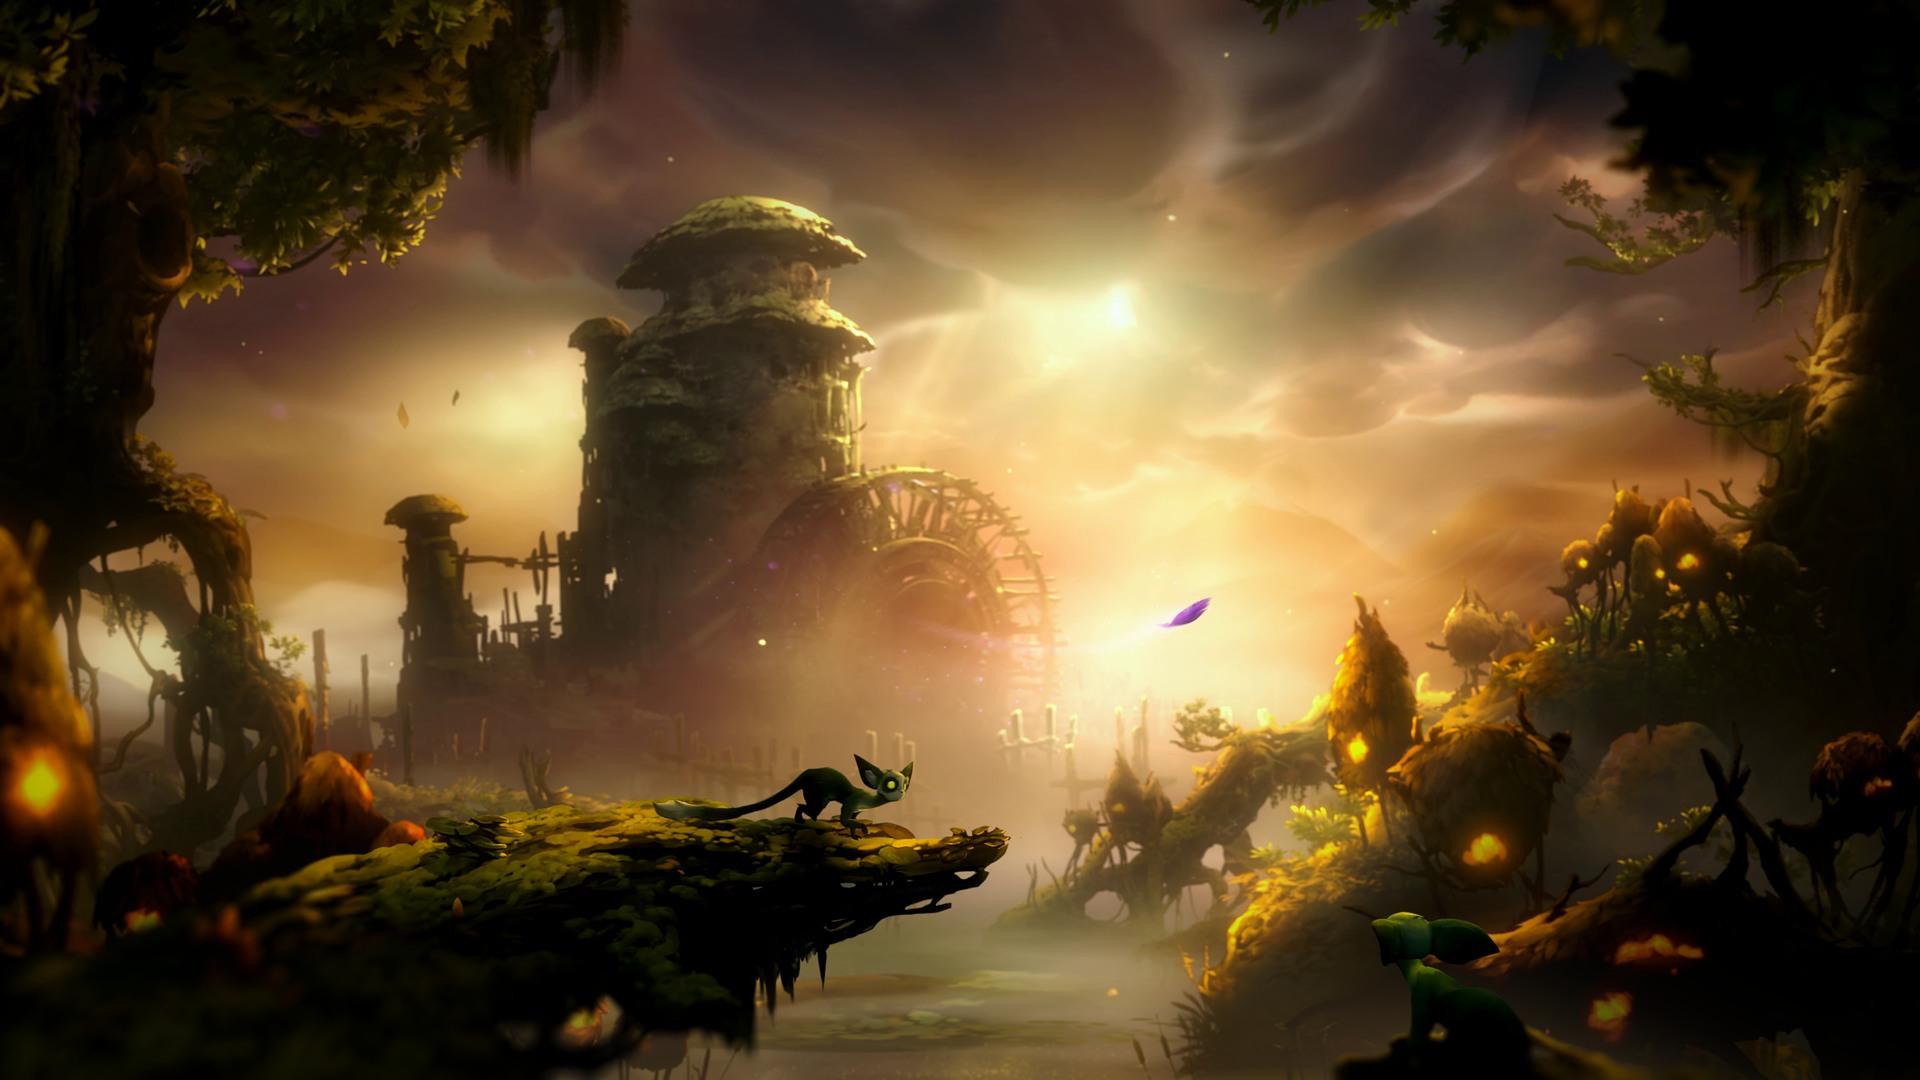 Mill In The Magic Forest Wallpaper From Ori And The